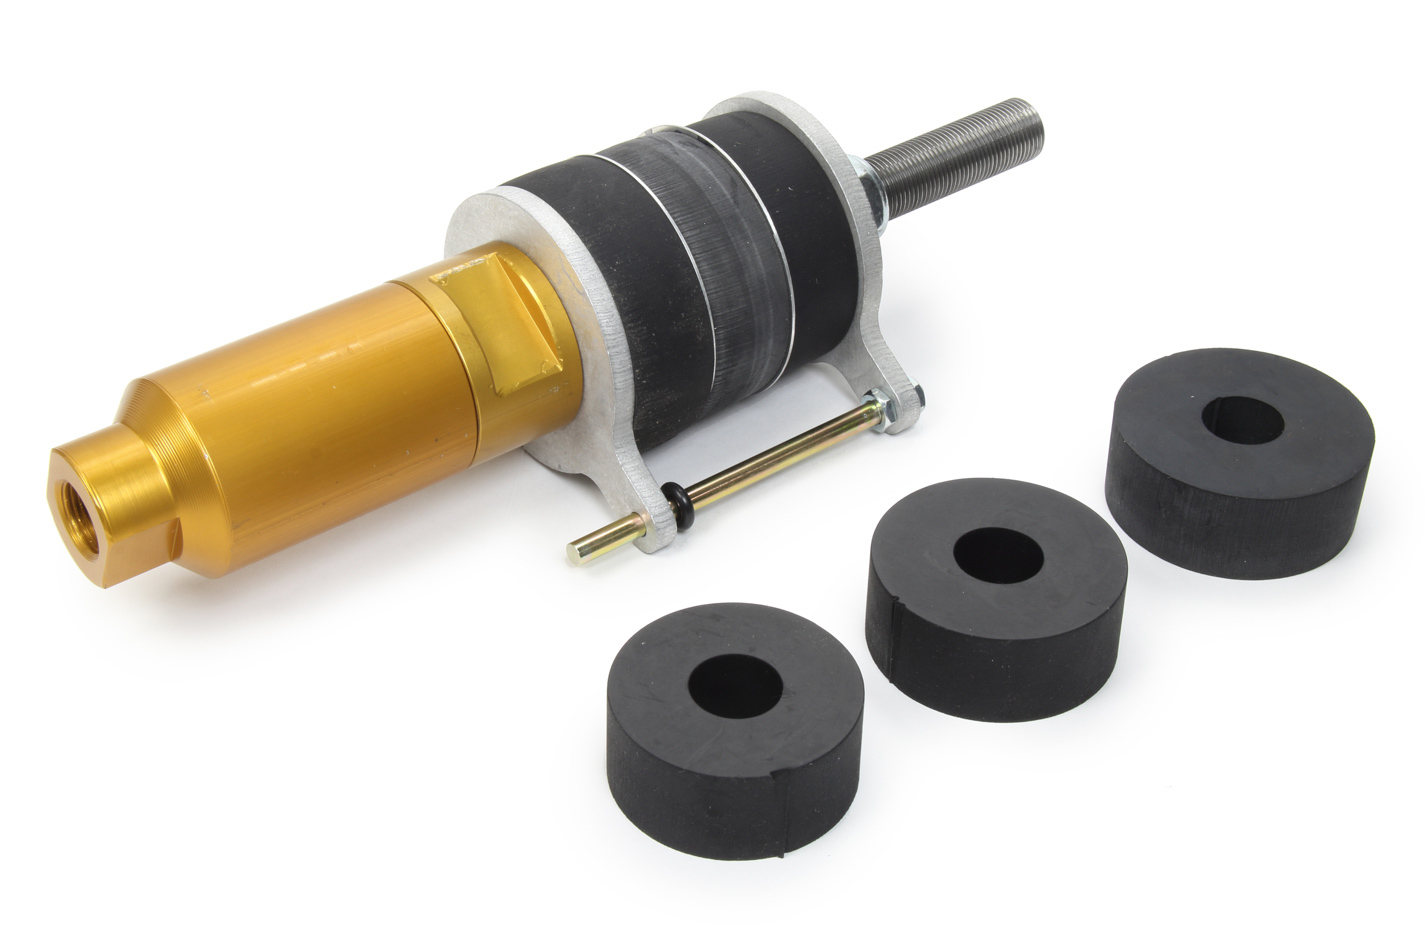 Coleman Racing Products 22040 - Torque Absorber, Rubber Bushings, Aluminum, Gold Anodized, Each